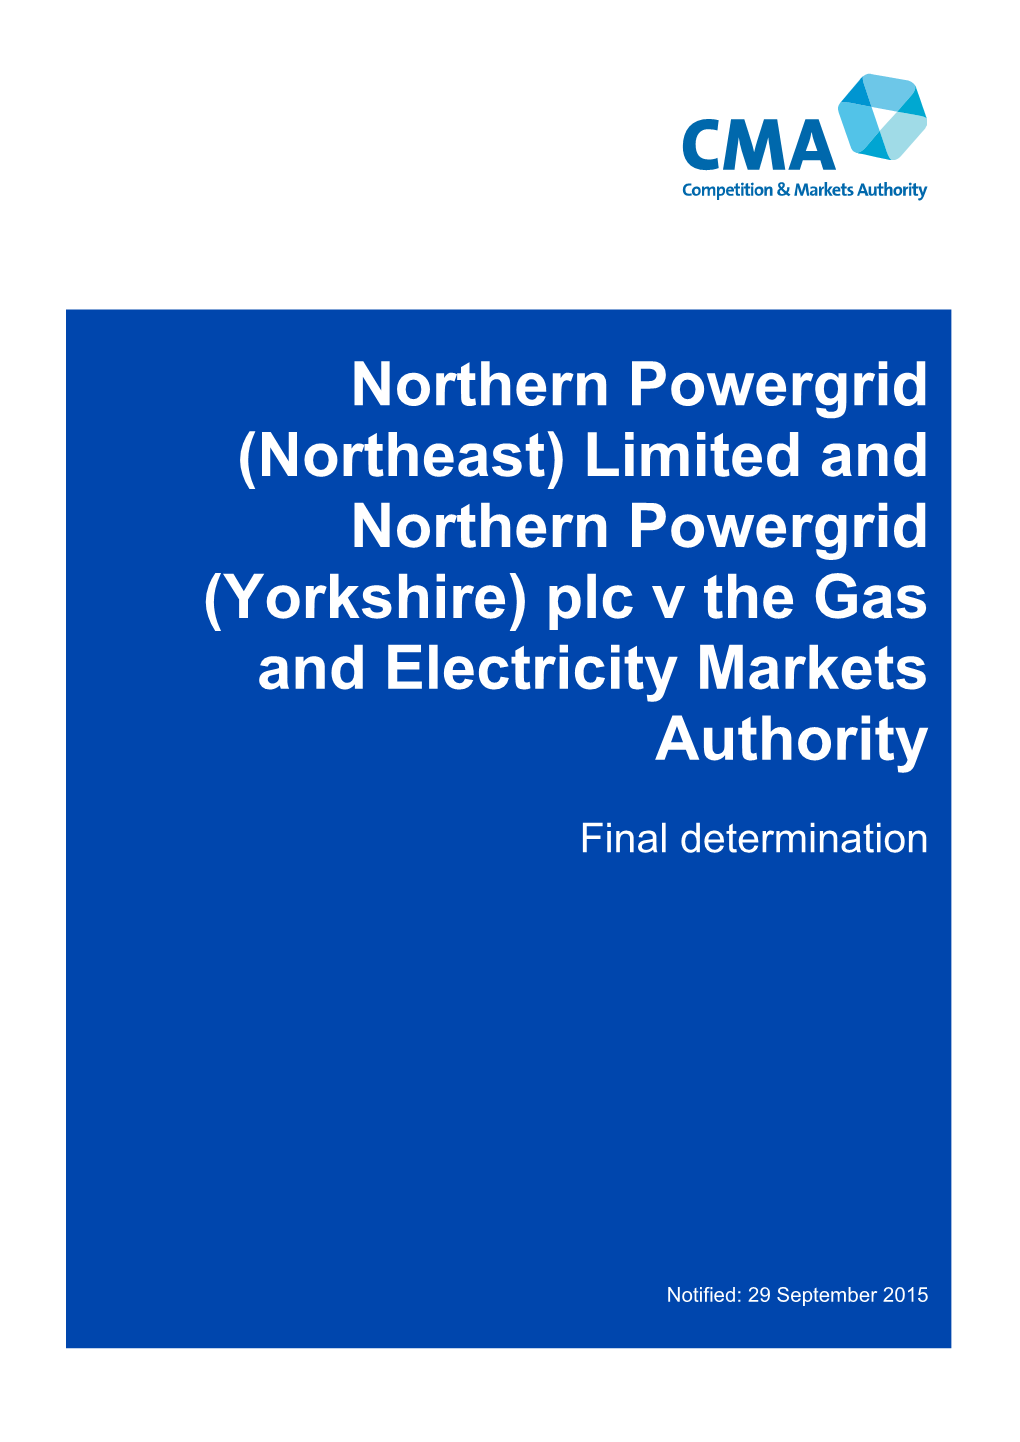 (Northeast) Limited and Northern Powergrid (Yorkshire) Plc V the Gas and Electricity Markets Authority